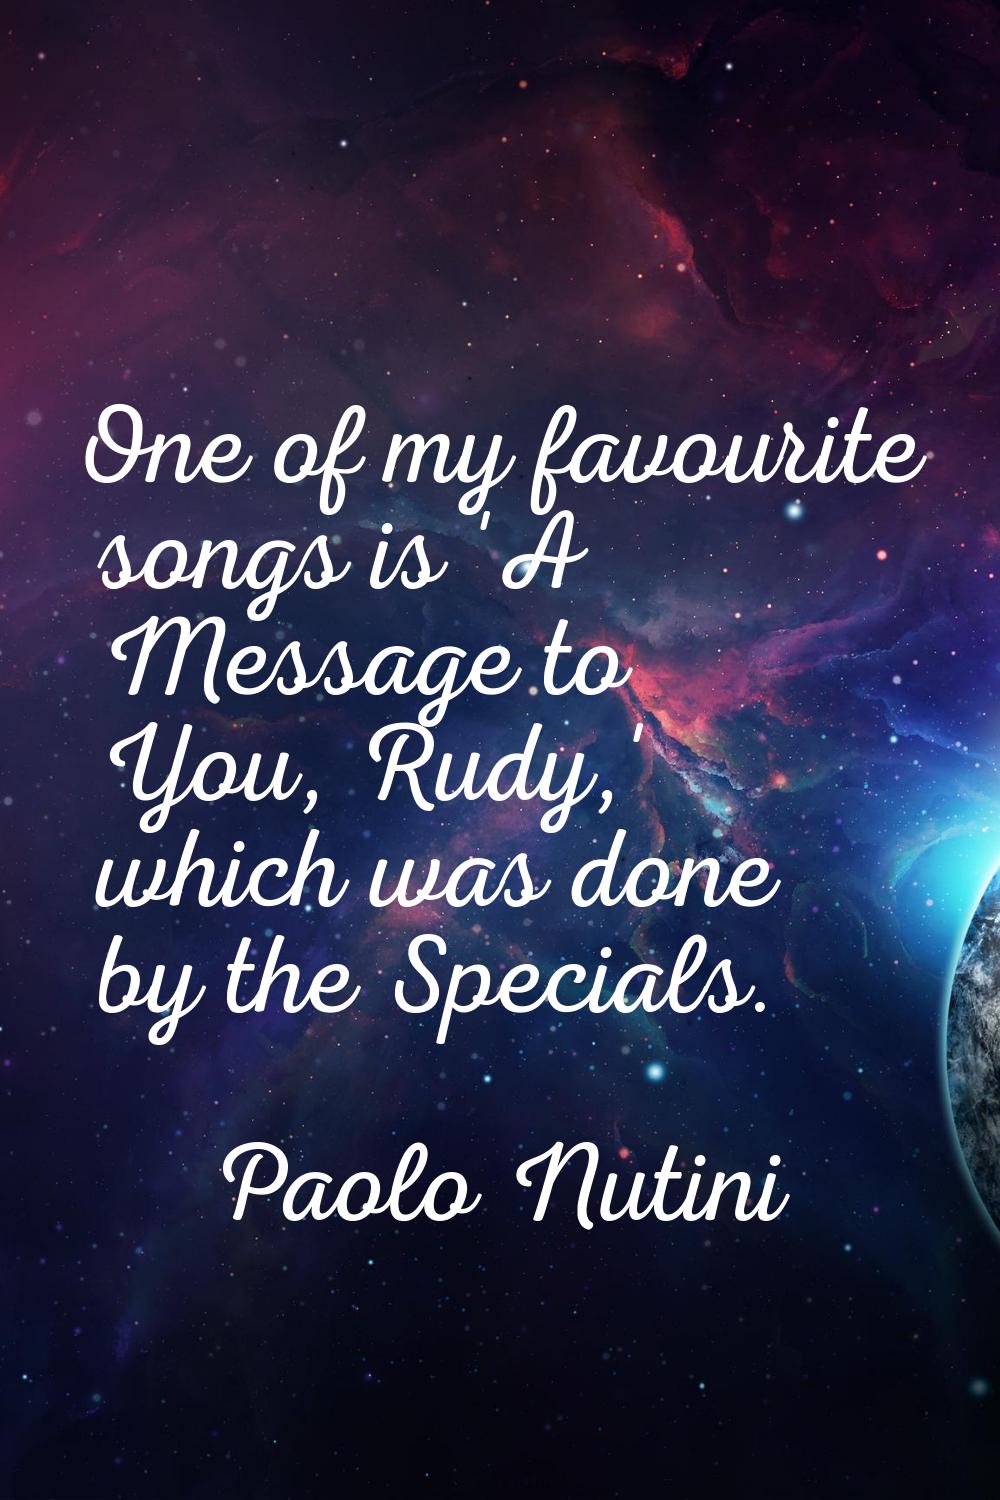 One of my favourite songs is 'A Message to You, Rudy,' which was done by the Specials.